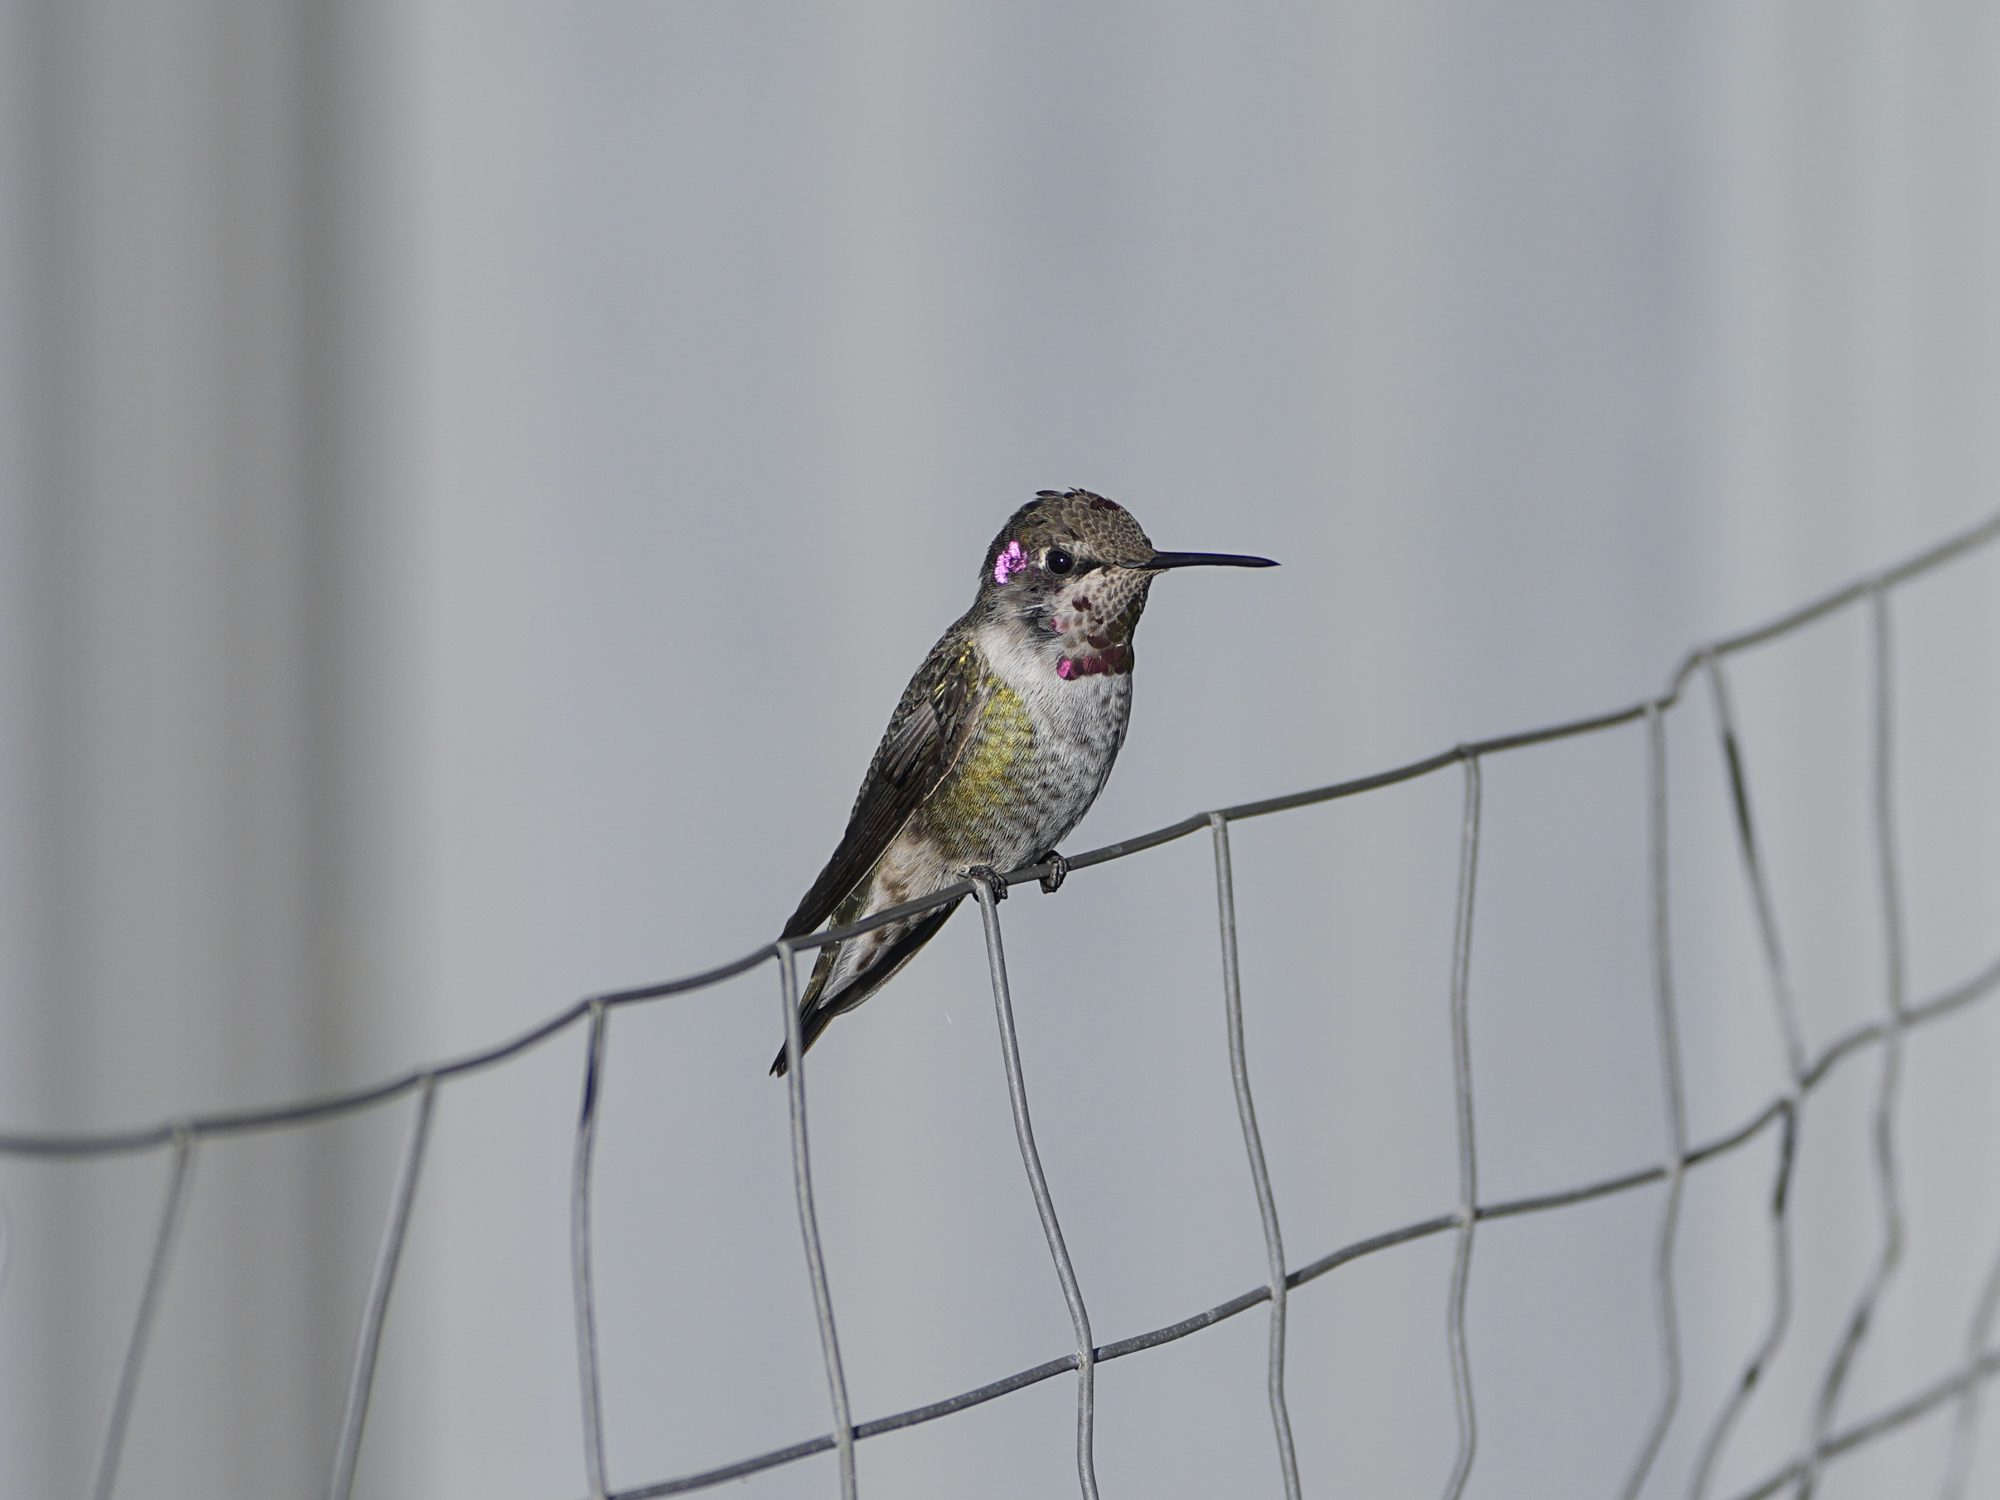 An immature male Anna's, with partially iridescent gorget, is sitting on a wire fence